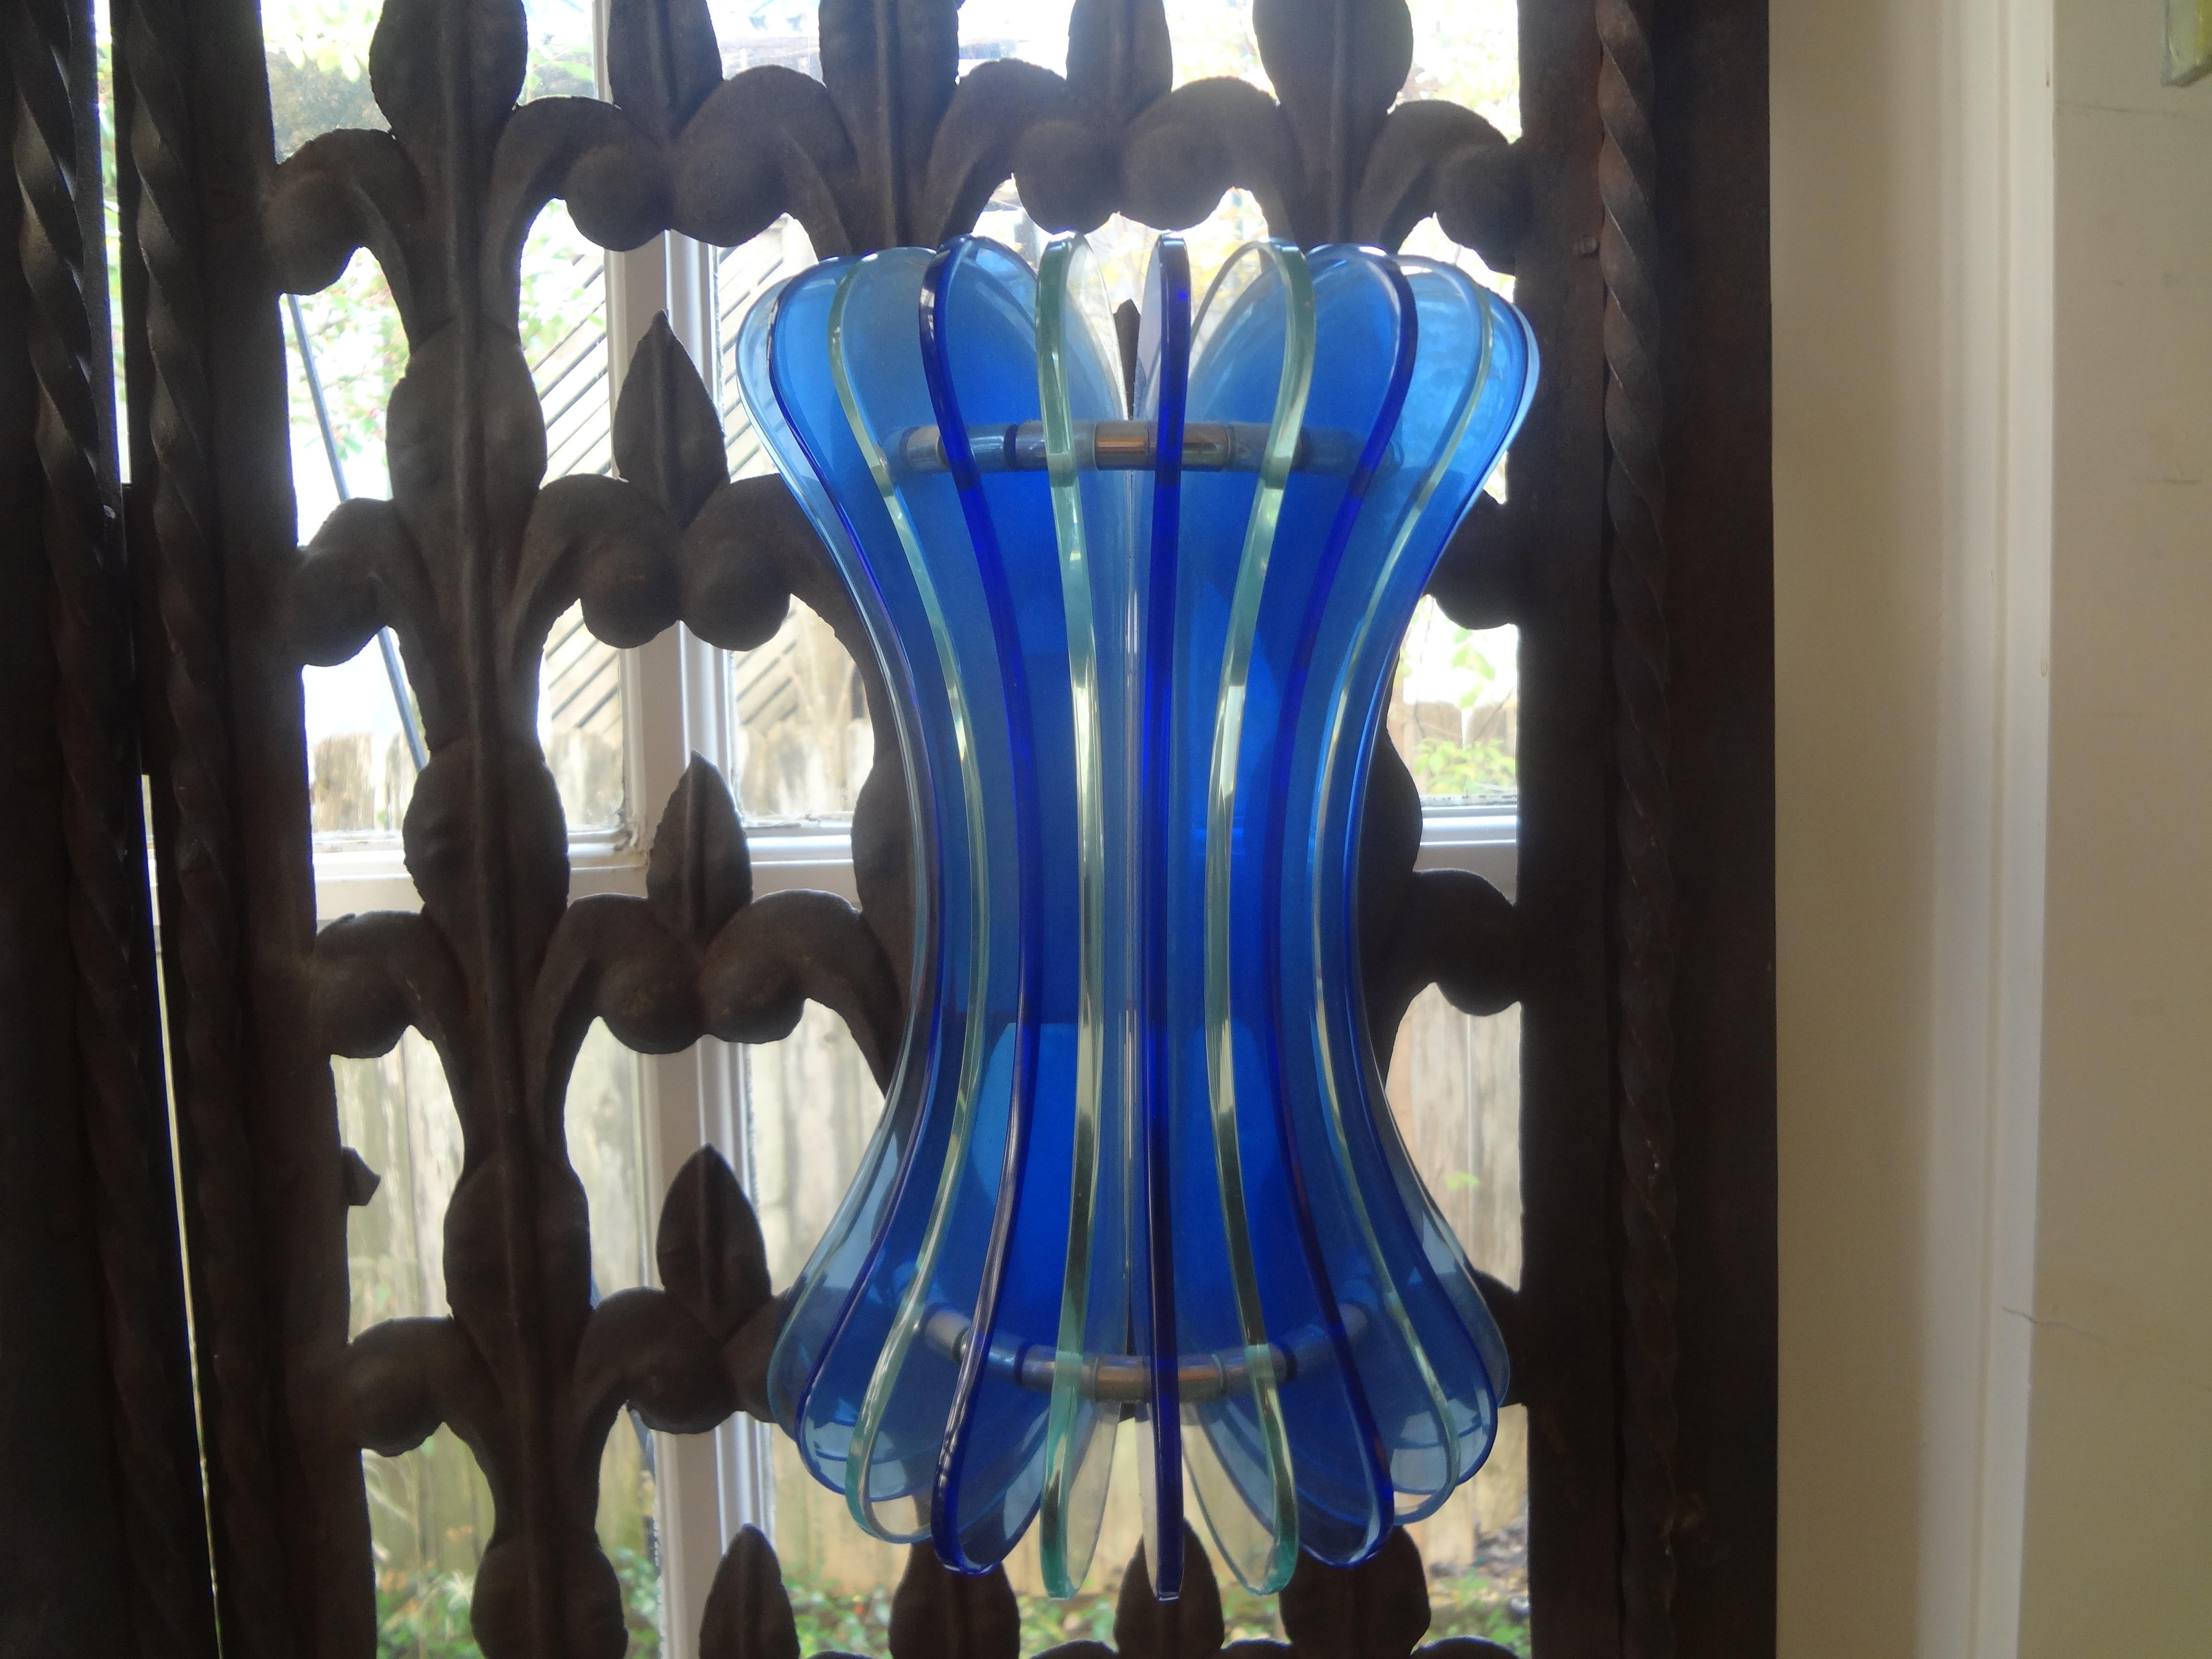 Pair of Italian blue glass sconces by Veca.
This stunning pair of Italian sconces have alternating blue and clear glass panels mounted on chromed steel frames.
Each sconce has been newly wired with two new sockets.